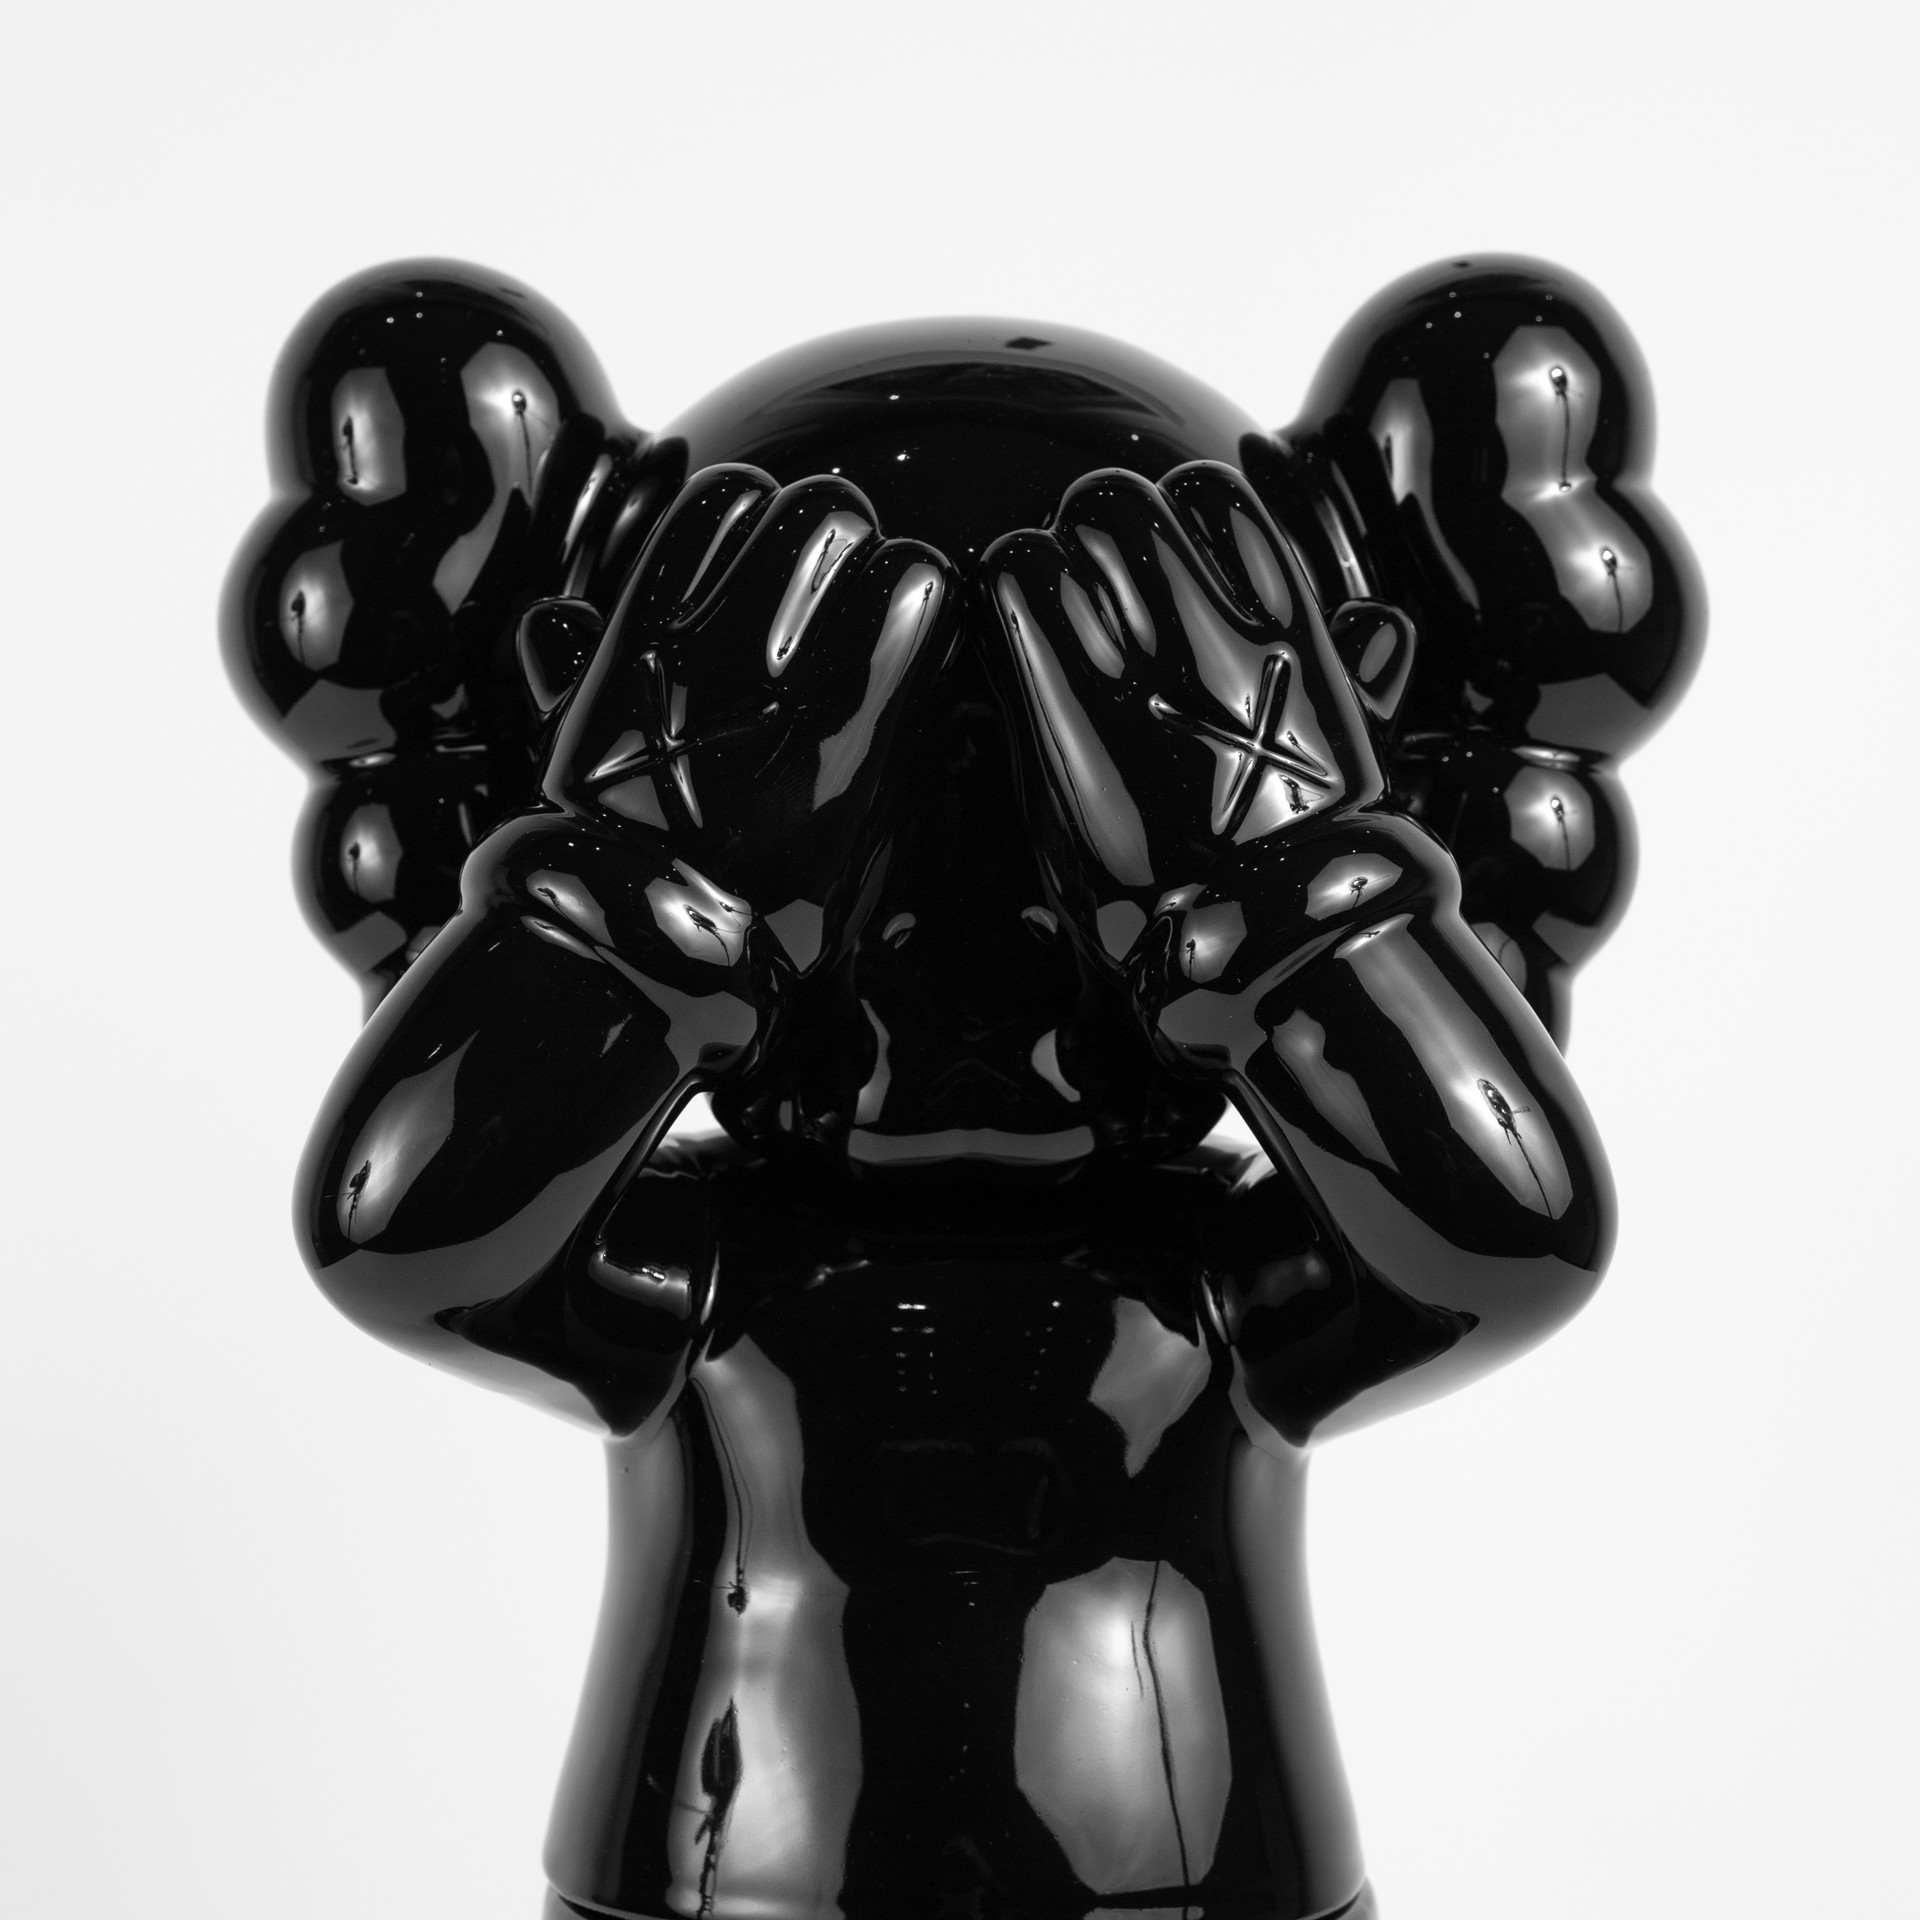 'Holiday UK' Ceramic Containers by Kaws